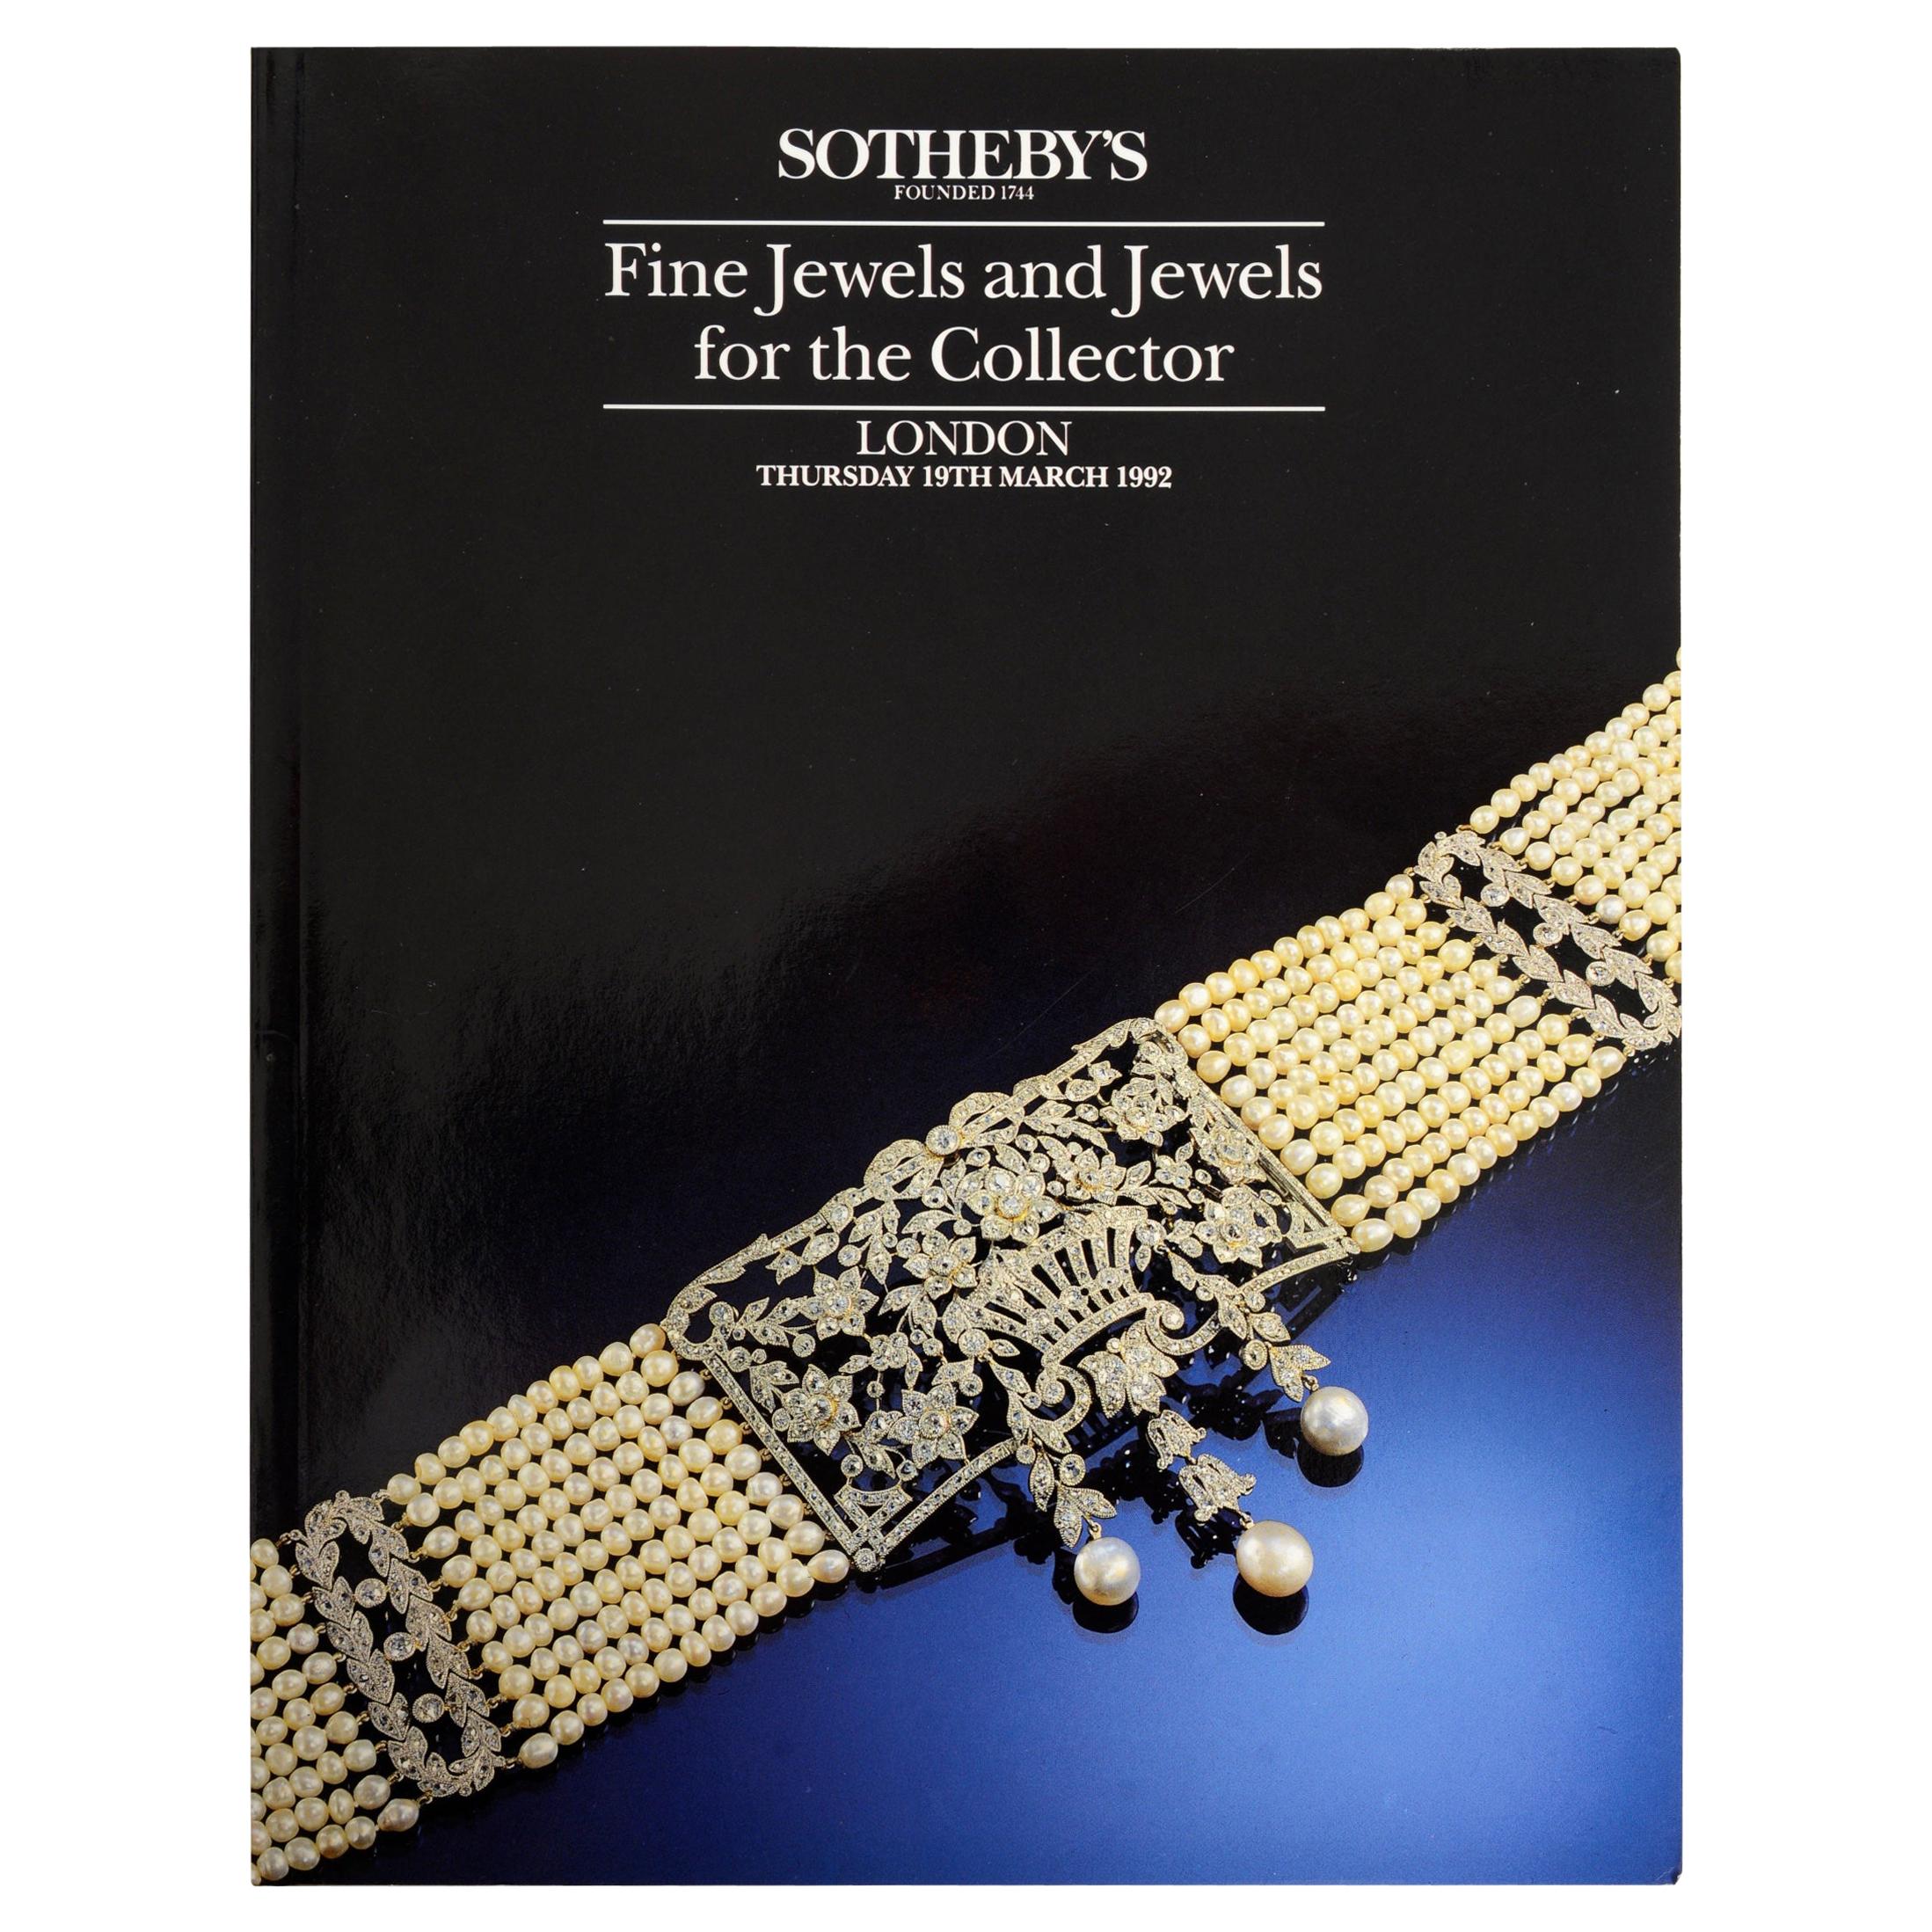 Sotheby's Fine Jewels and Jewels for the Collector, London 1992, First Edition